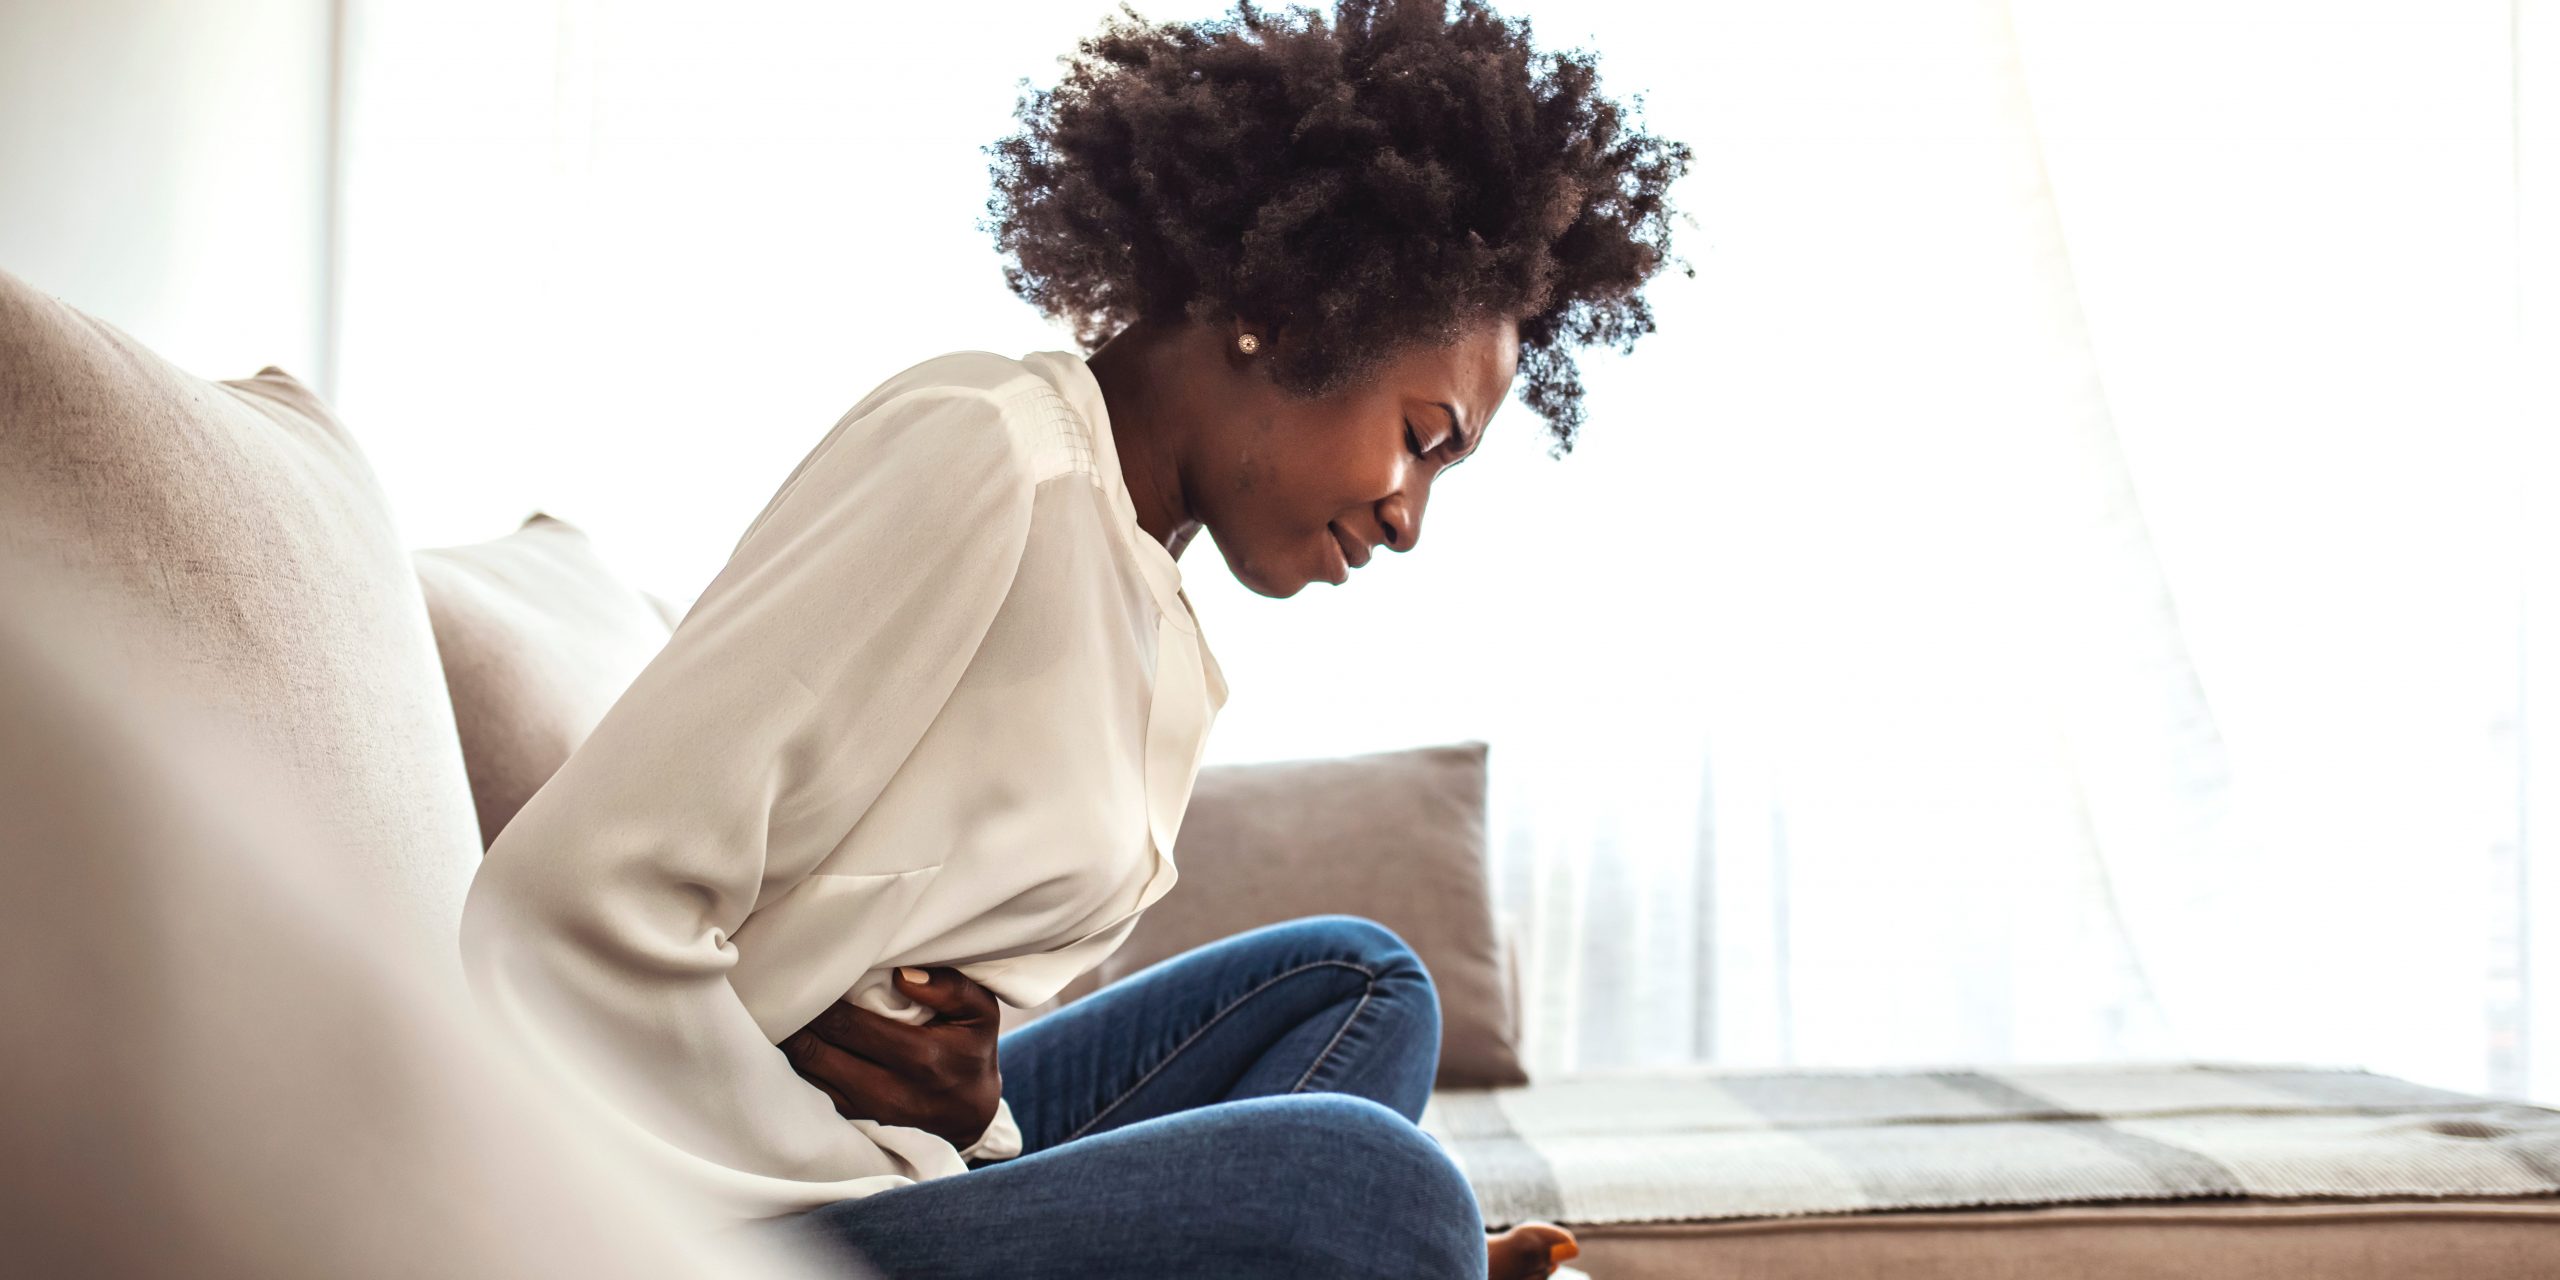 A woman sitting on a couch curls over and holds her hips and stomach in pain.